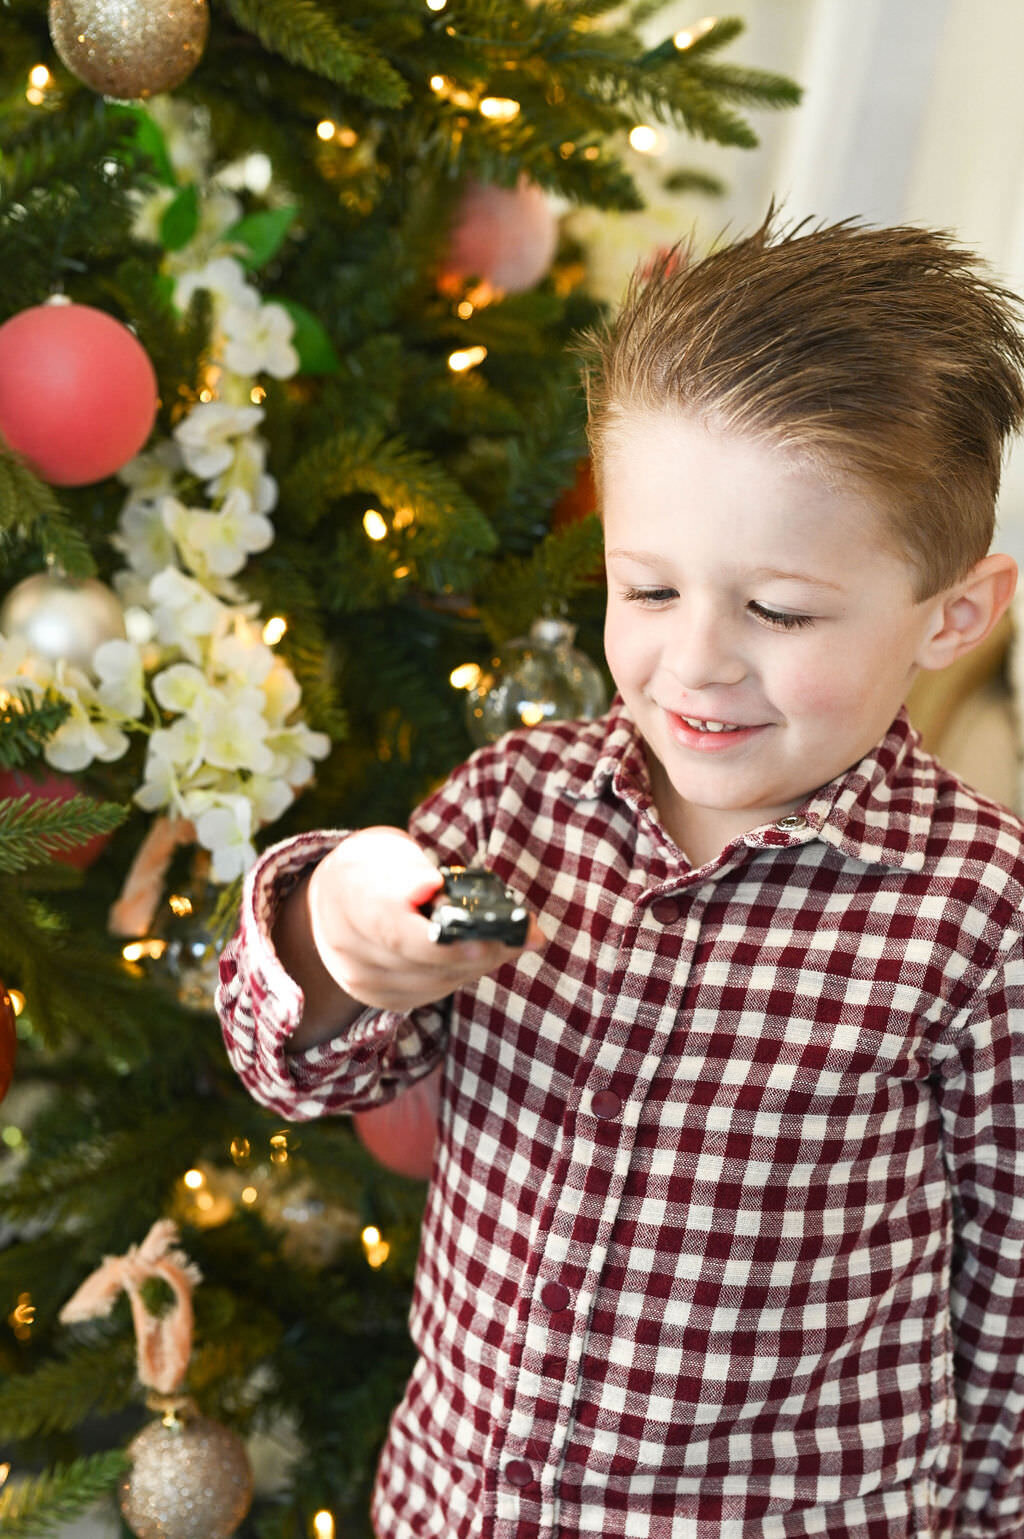 A small boy standing next to a Christmas tree holding up a toy car.